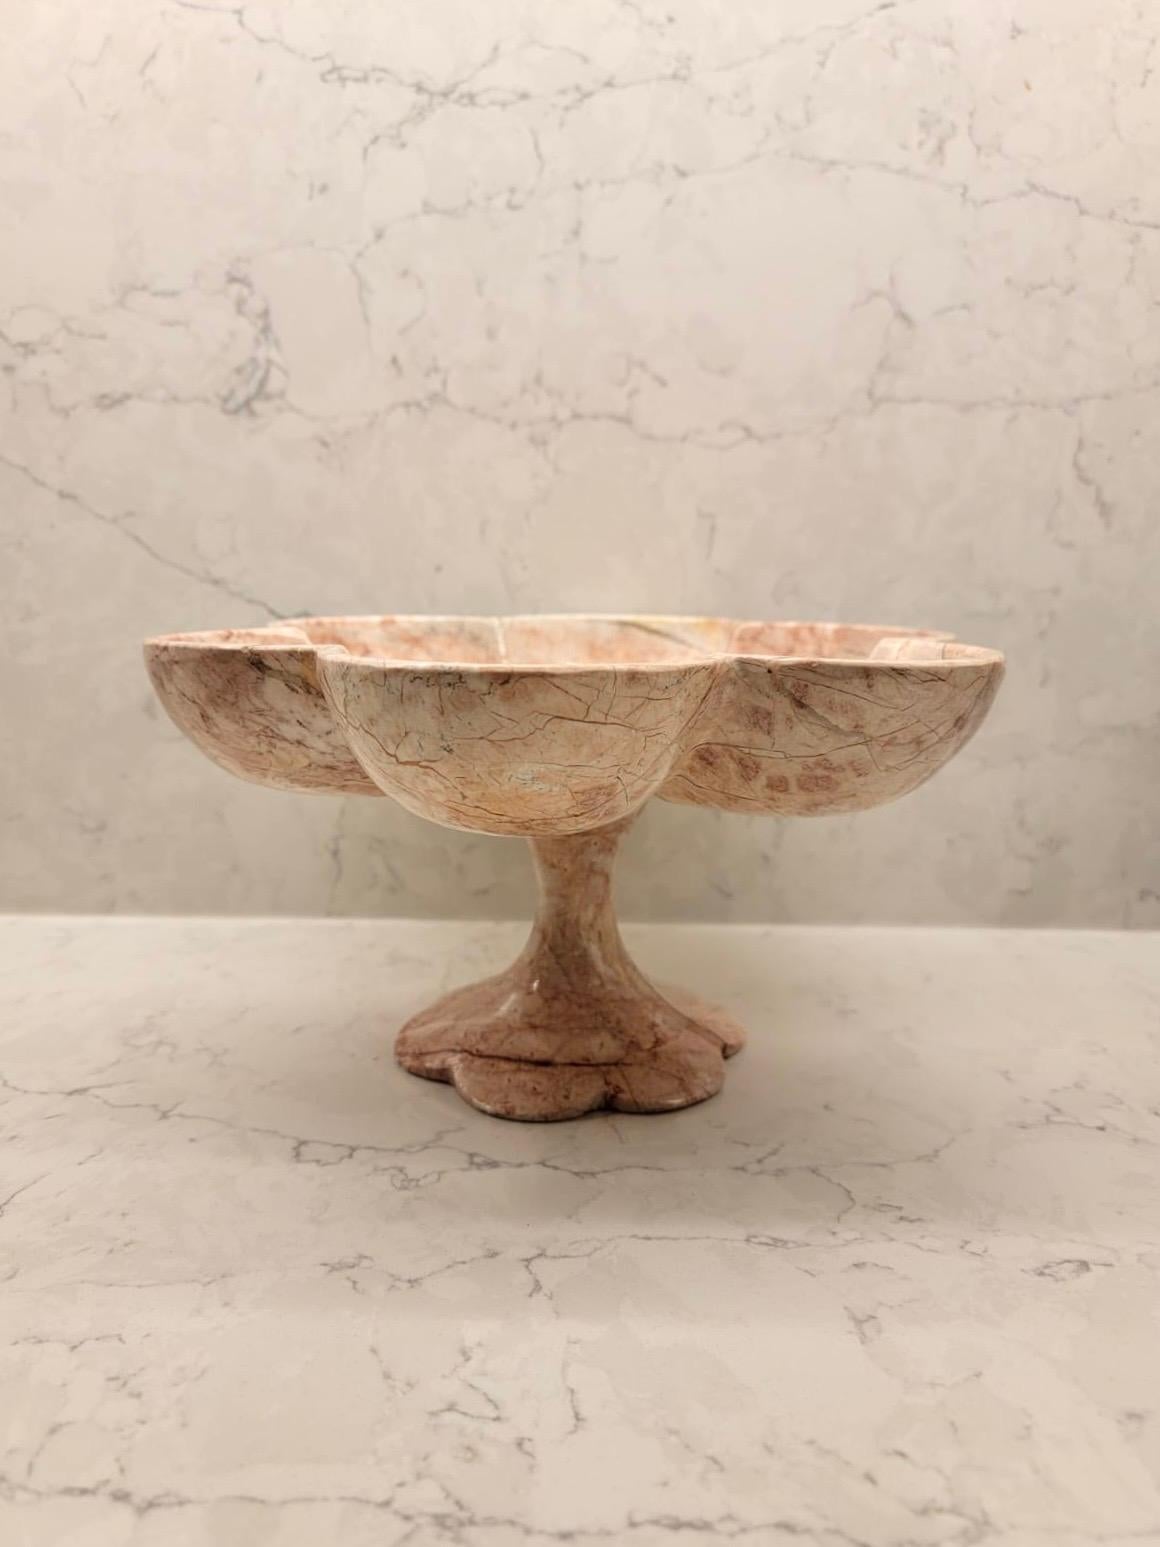 Spectacular pink marble alabaster stone bowl with a pedestal. This stunning bowl stands on a pedestal with scalloped edges. There’s beautiful veining throughout the piece. It’s believed to be hand carved. It can be used as a decorative bowl, it can